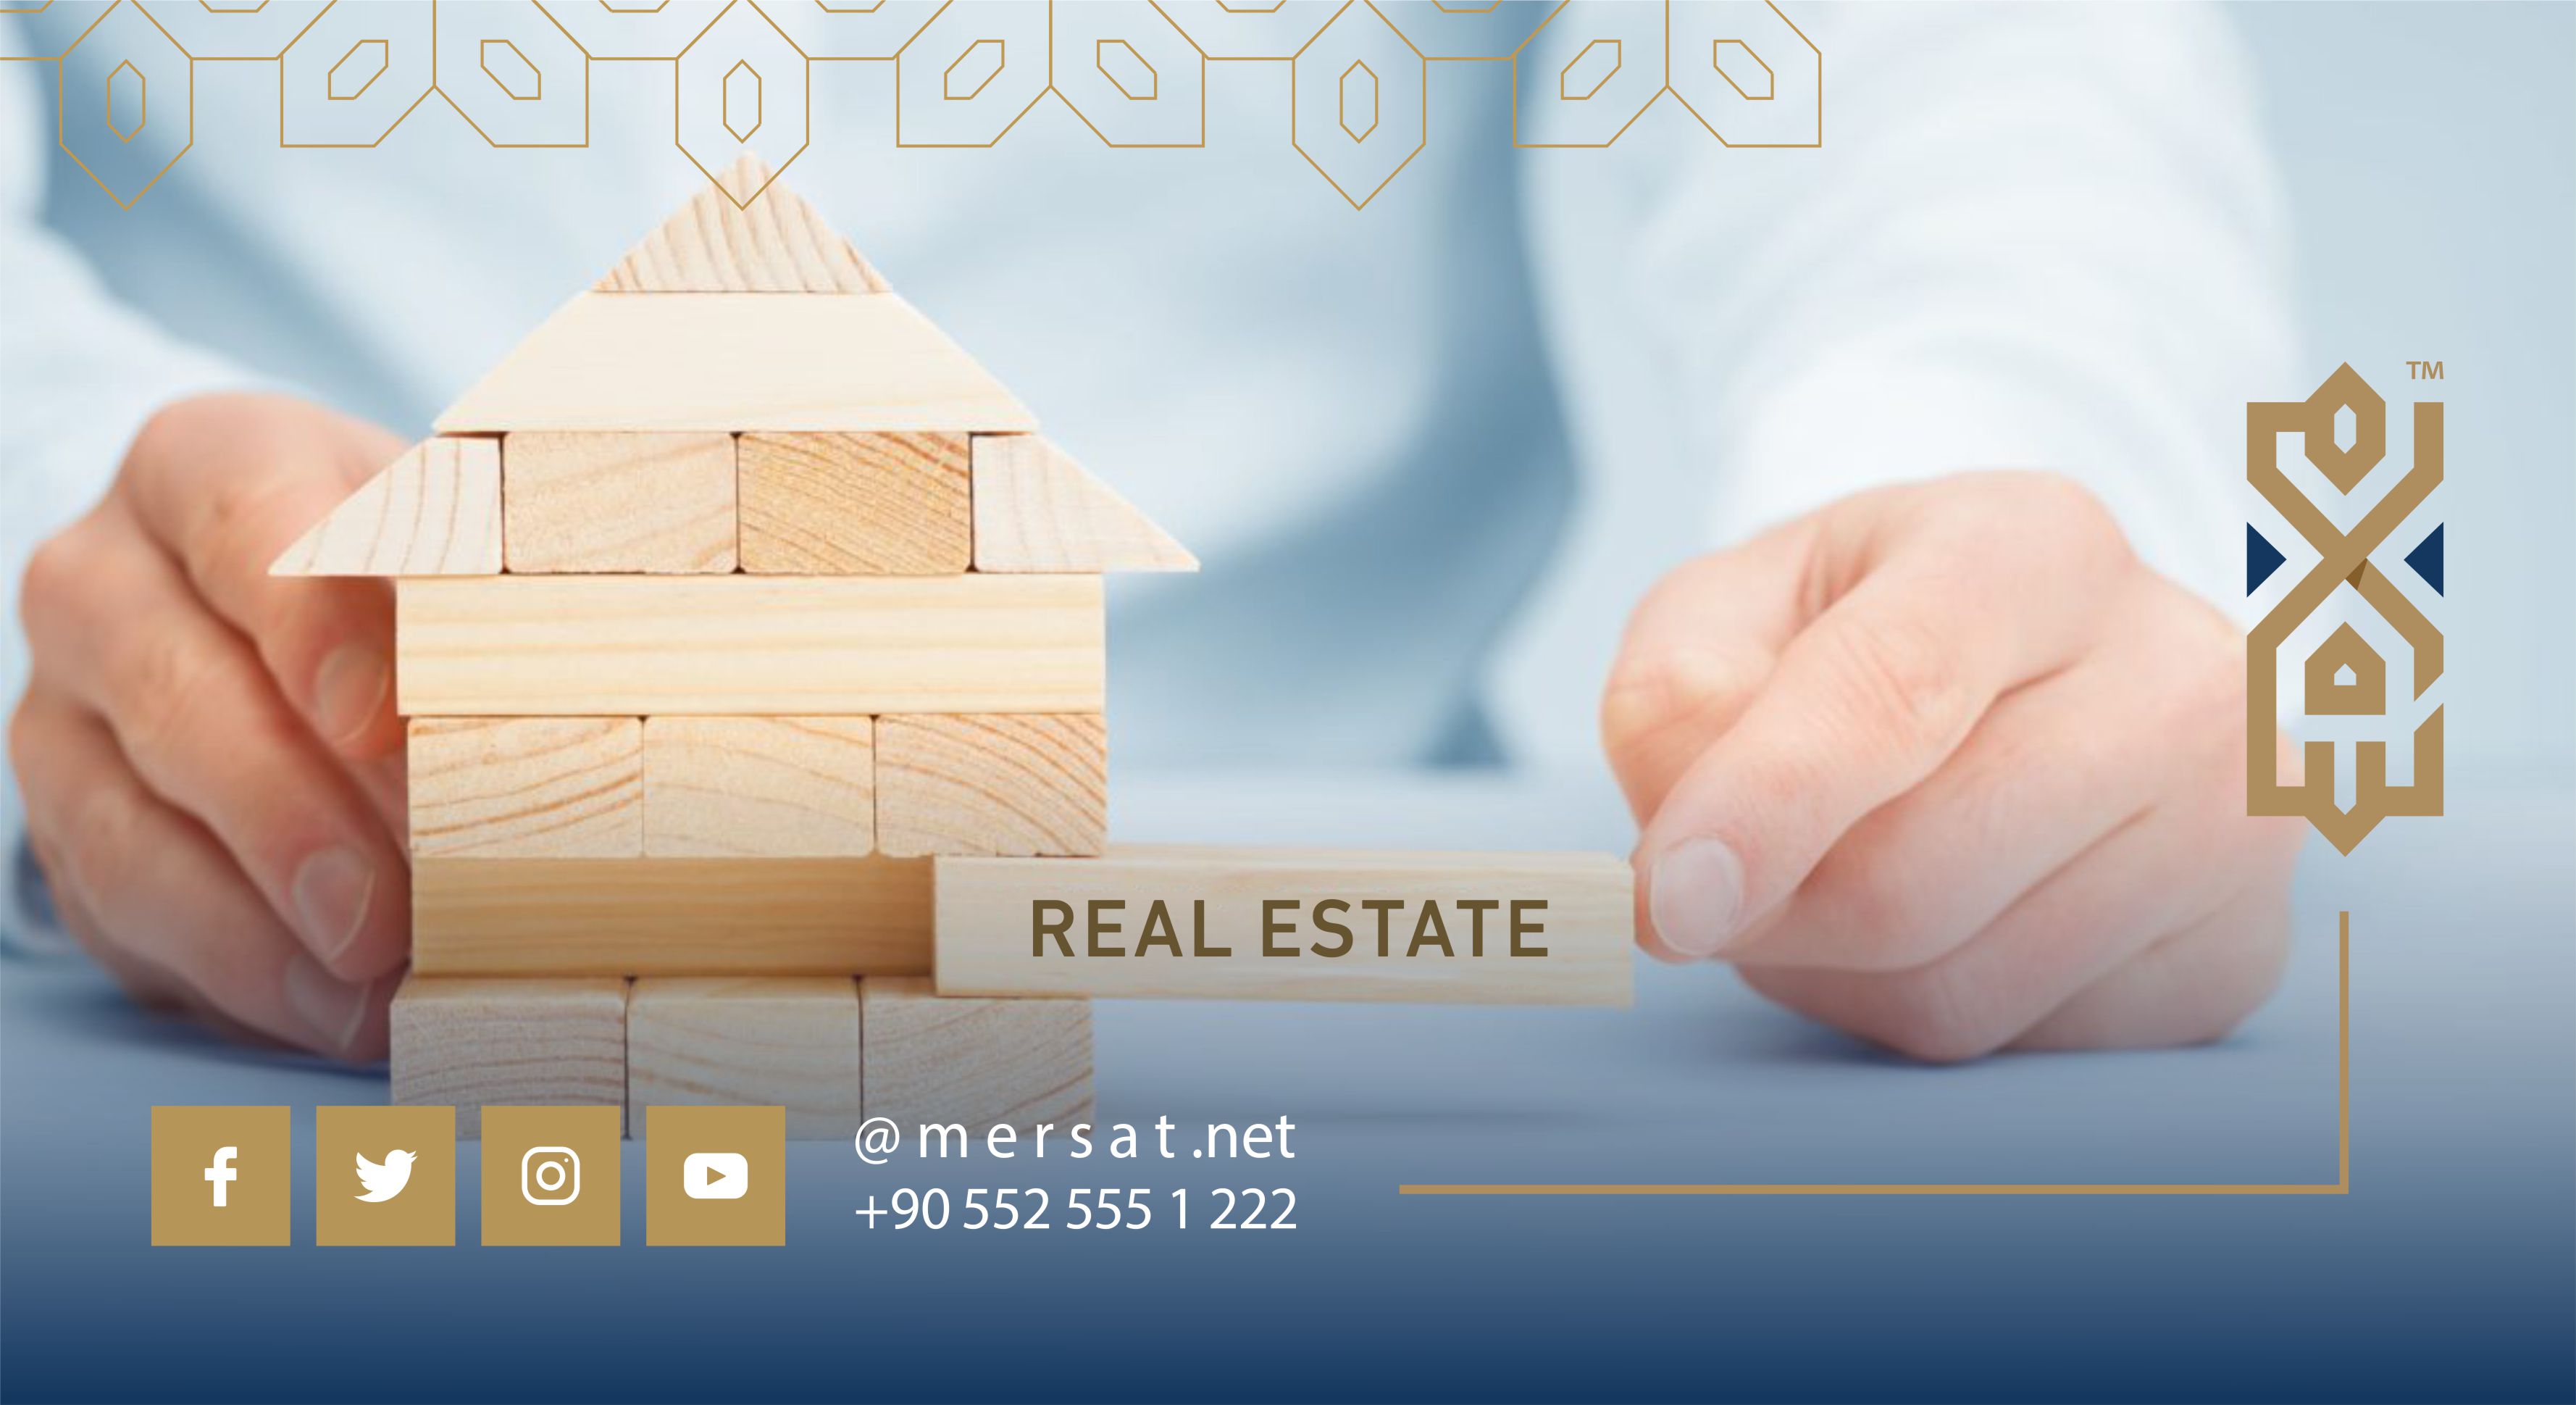 Terminology in the real estate market